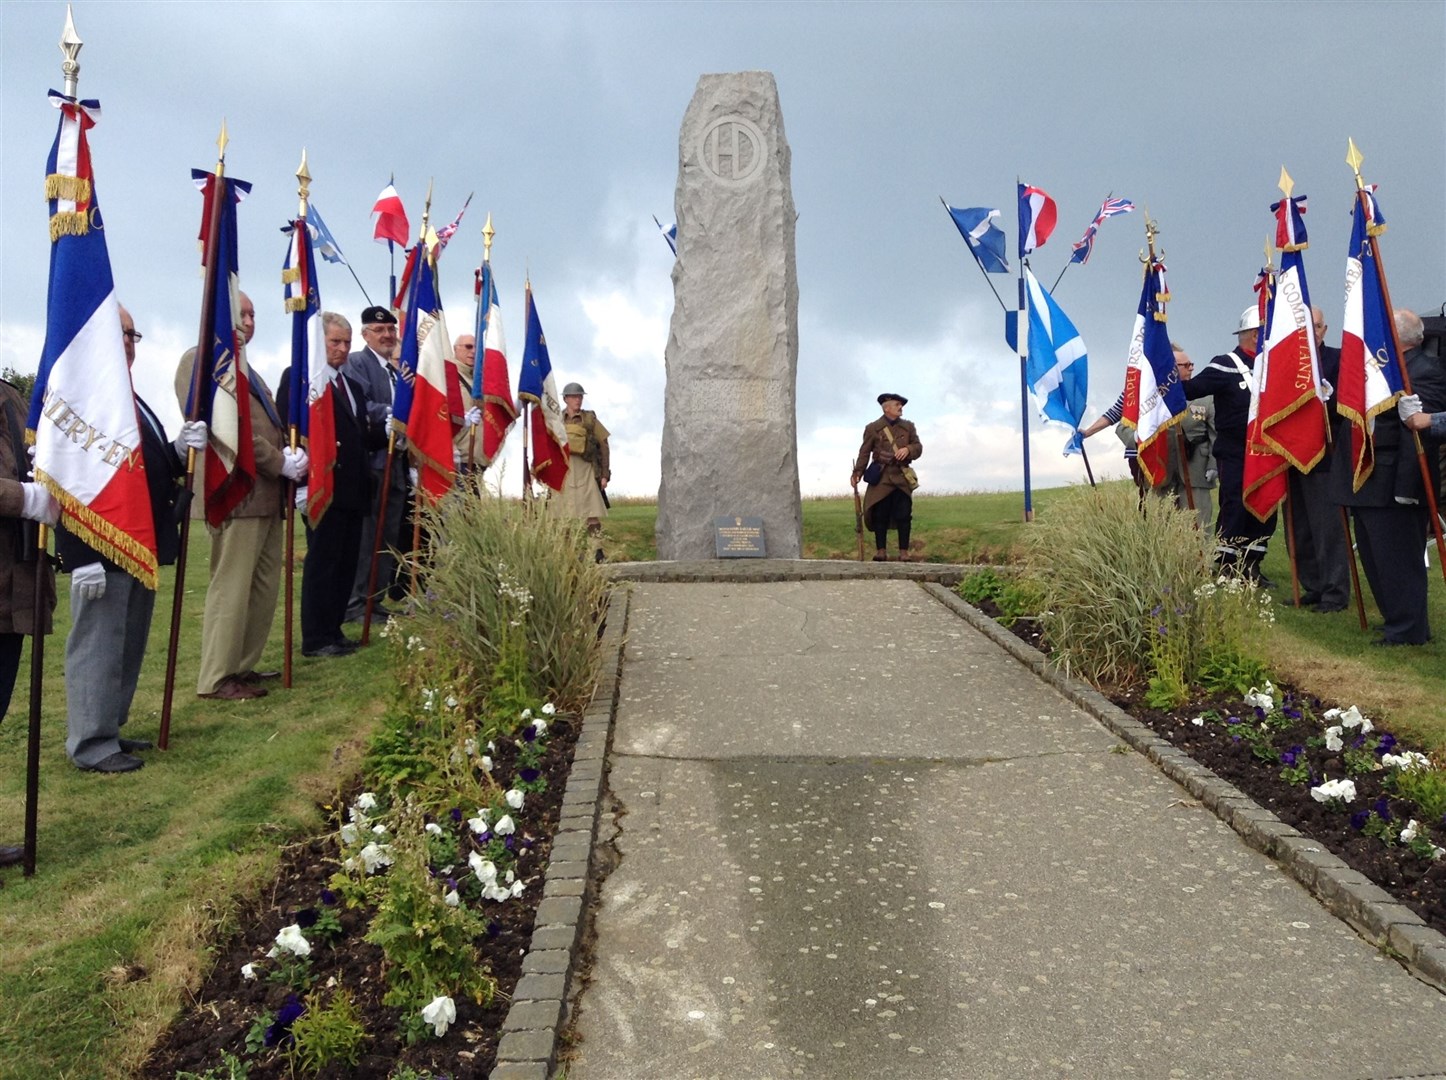 A recent commemorative event at the Normandy monument commemorating the 51st Division at St Valery-en-Caux.